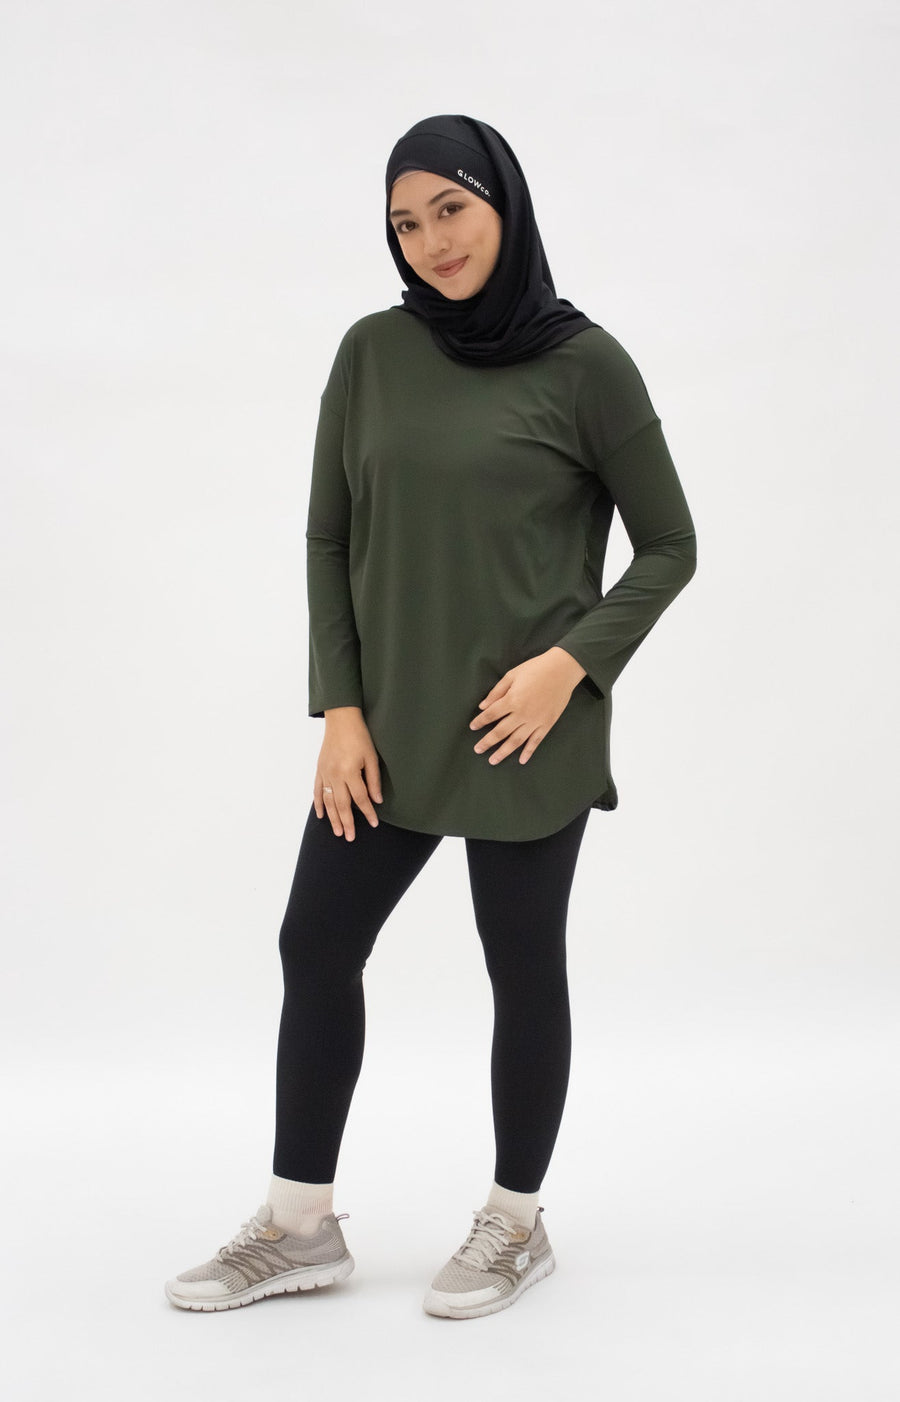 Tops GLOWco Exclusive Seriously Smooth Top in Deep Olive